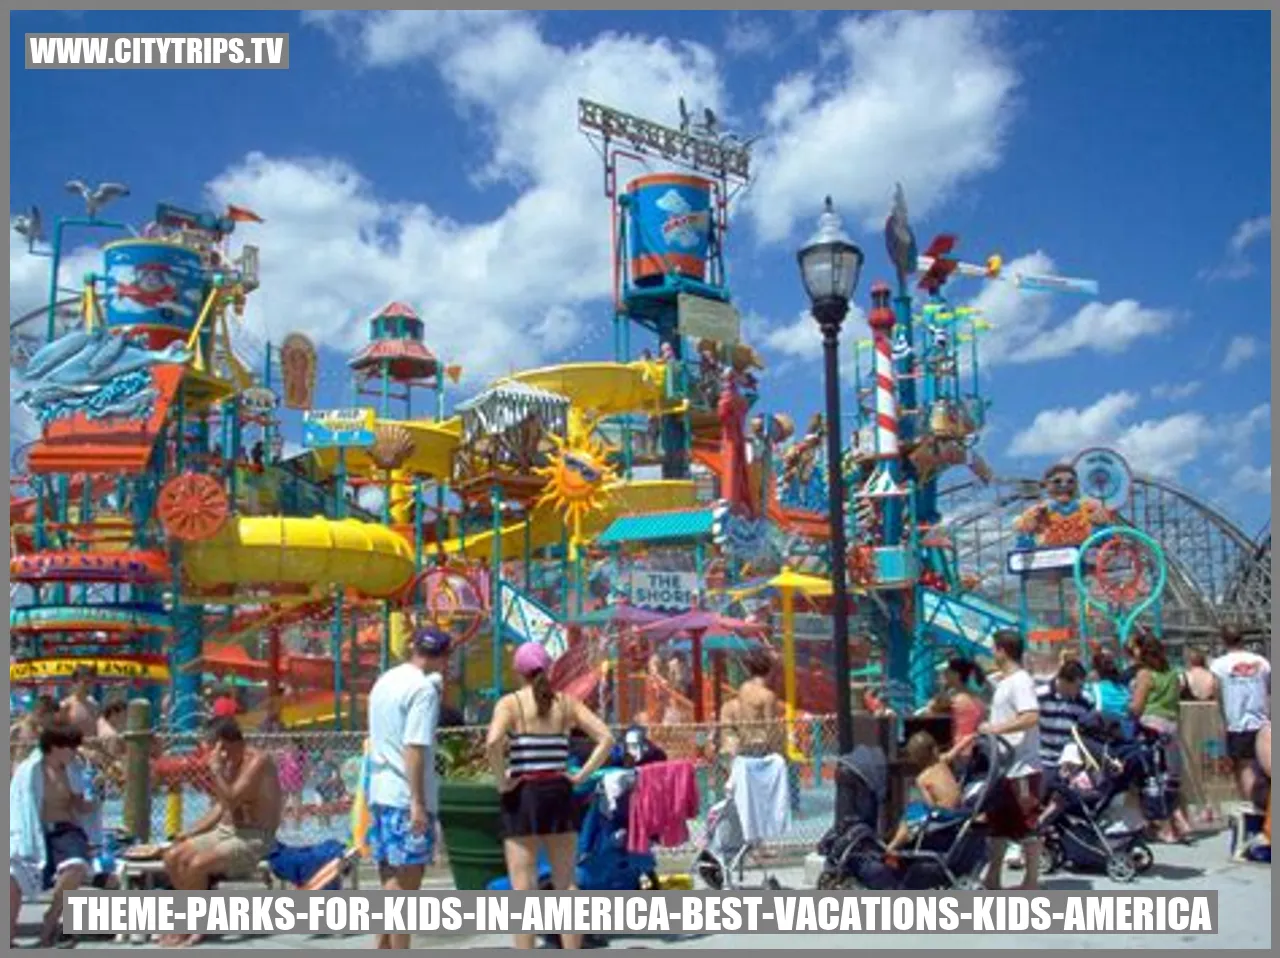 Theme Parks for Kids in America - Best Vacations for Kids in America